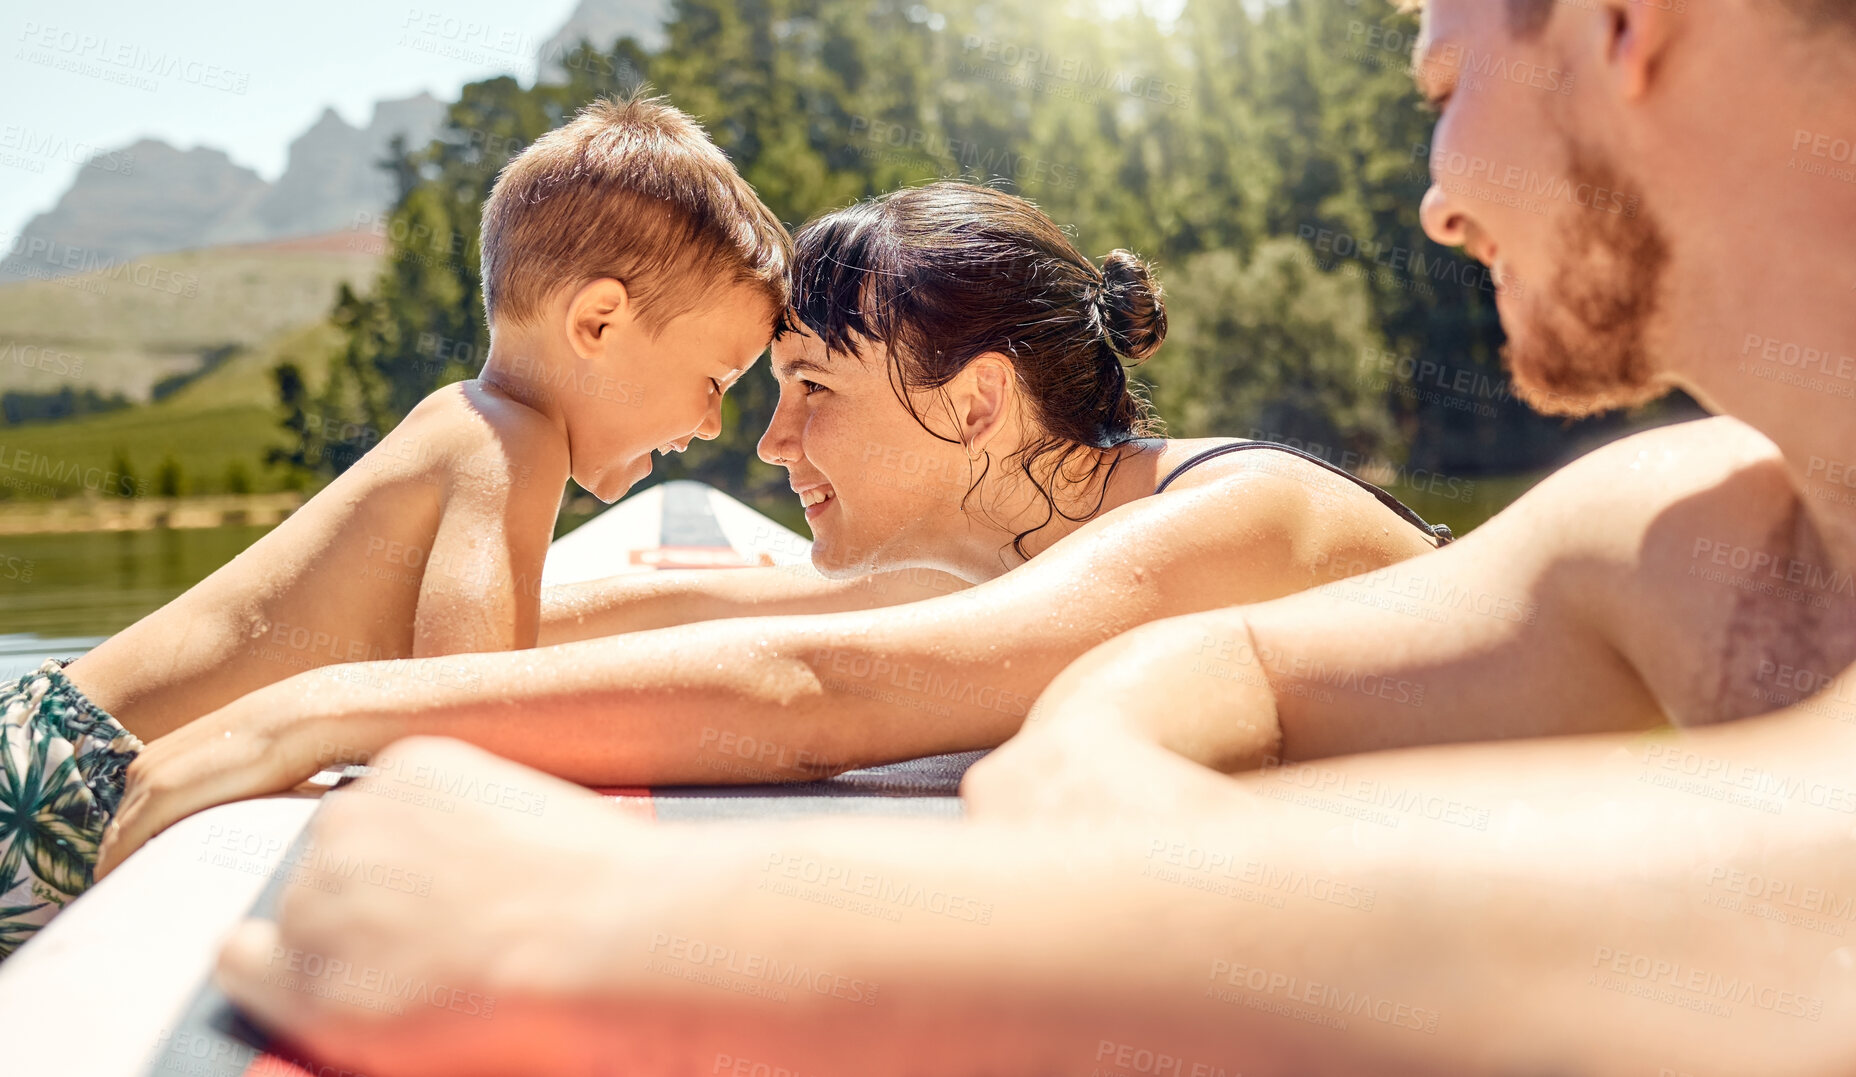 Buy stock photo Nature, bonding and family swimming in a lake together while on vacation or adventure in the woods. Happy, love and mother embracing her boy child while having fun in pond on holiday or weekend trip.